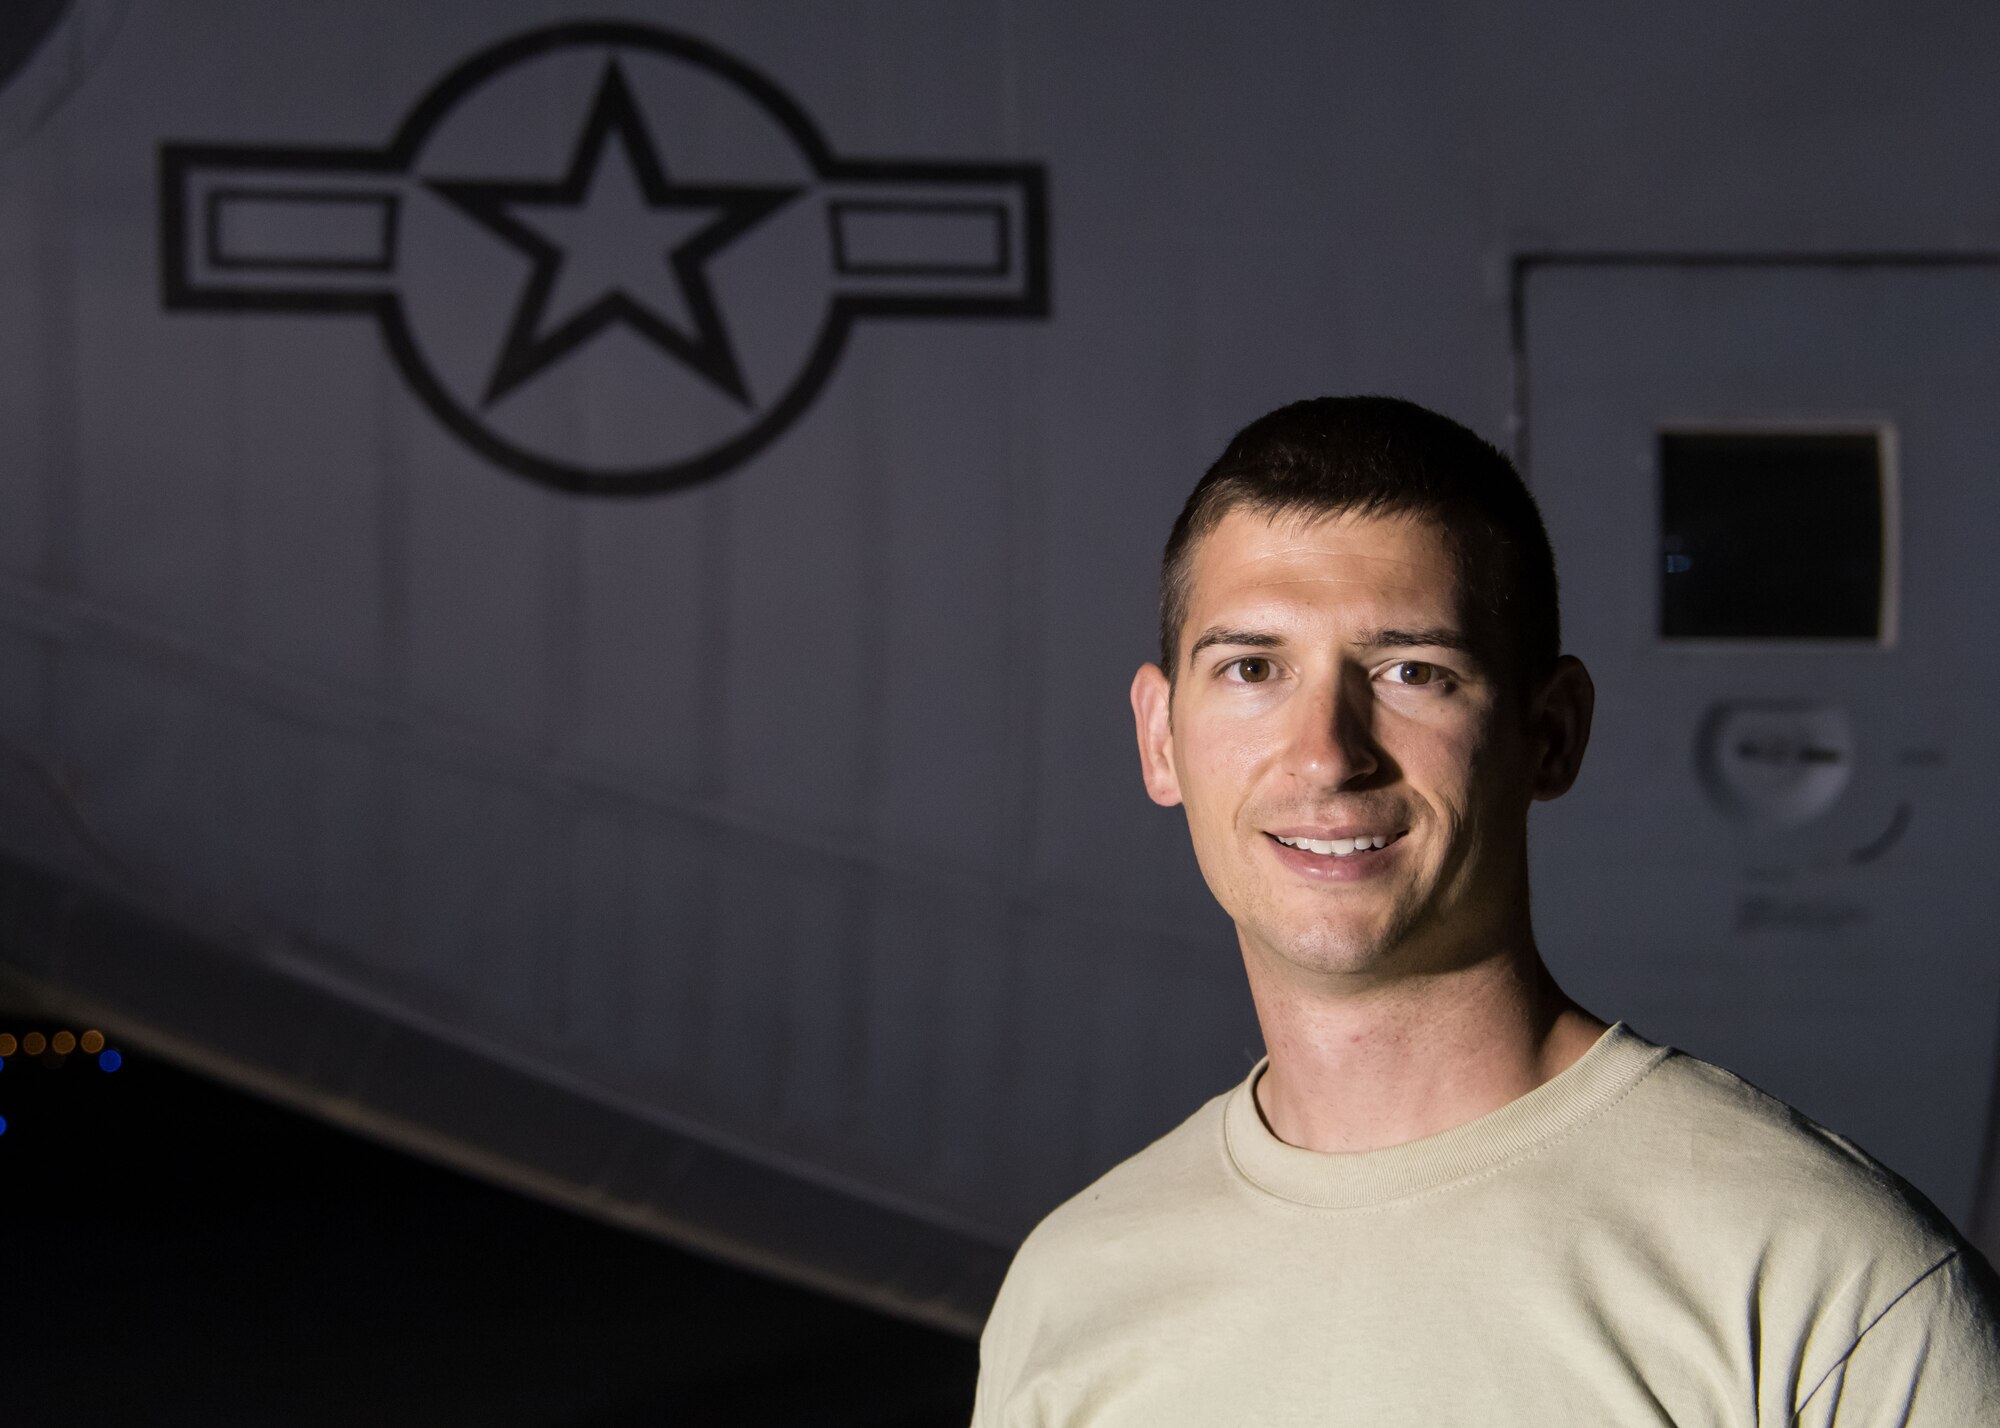 This week's Rock Solid Warrior is Staff Sgt. Trent Lowe, a 386th Expeditionary Aircraft Maintenance Squadron integrated communication counter-intelligence navigation systems technician. He is deployed from the North Carolina Air National Guard. (U.S. Air Force photo/Senior Airman Andrew Park)